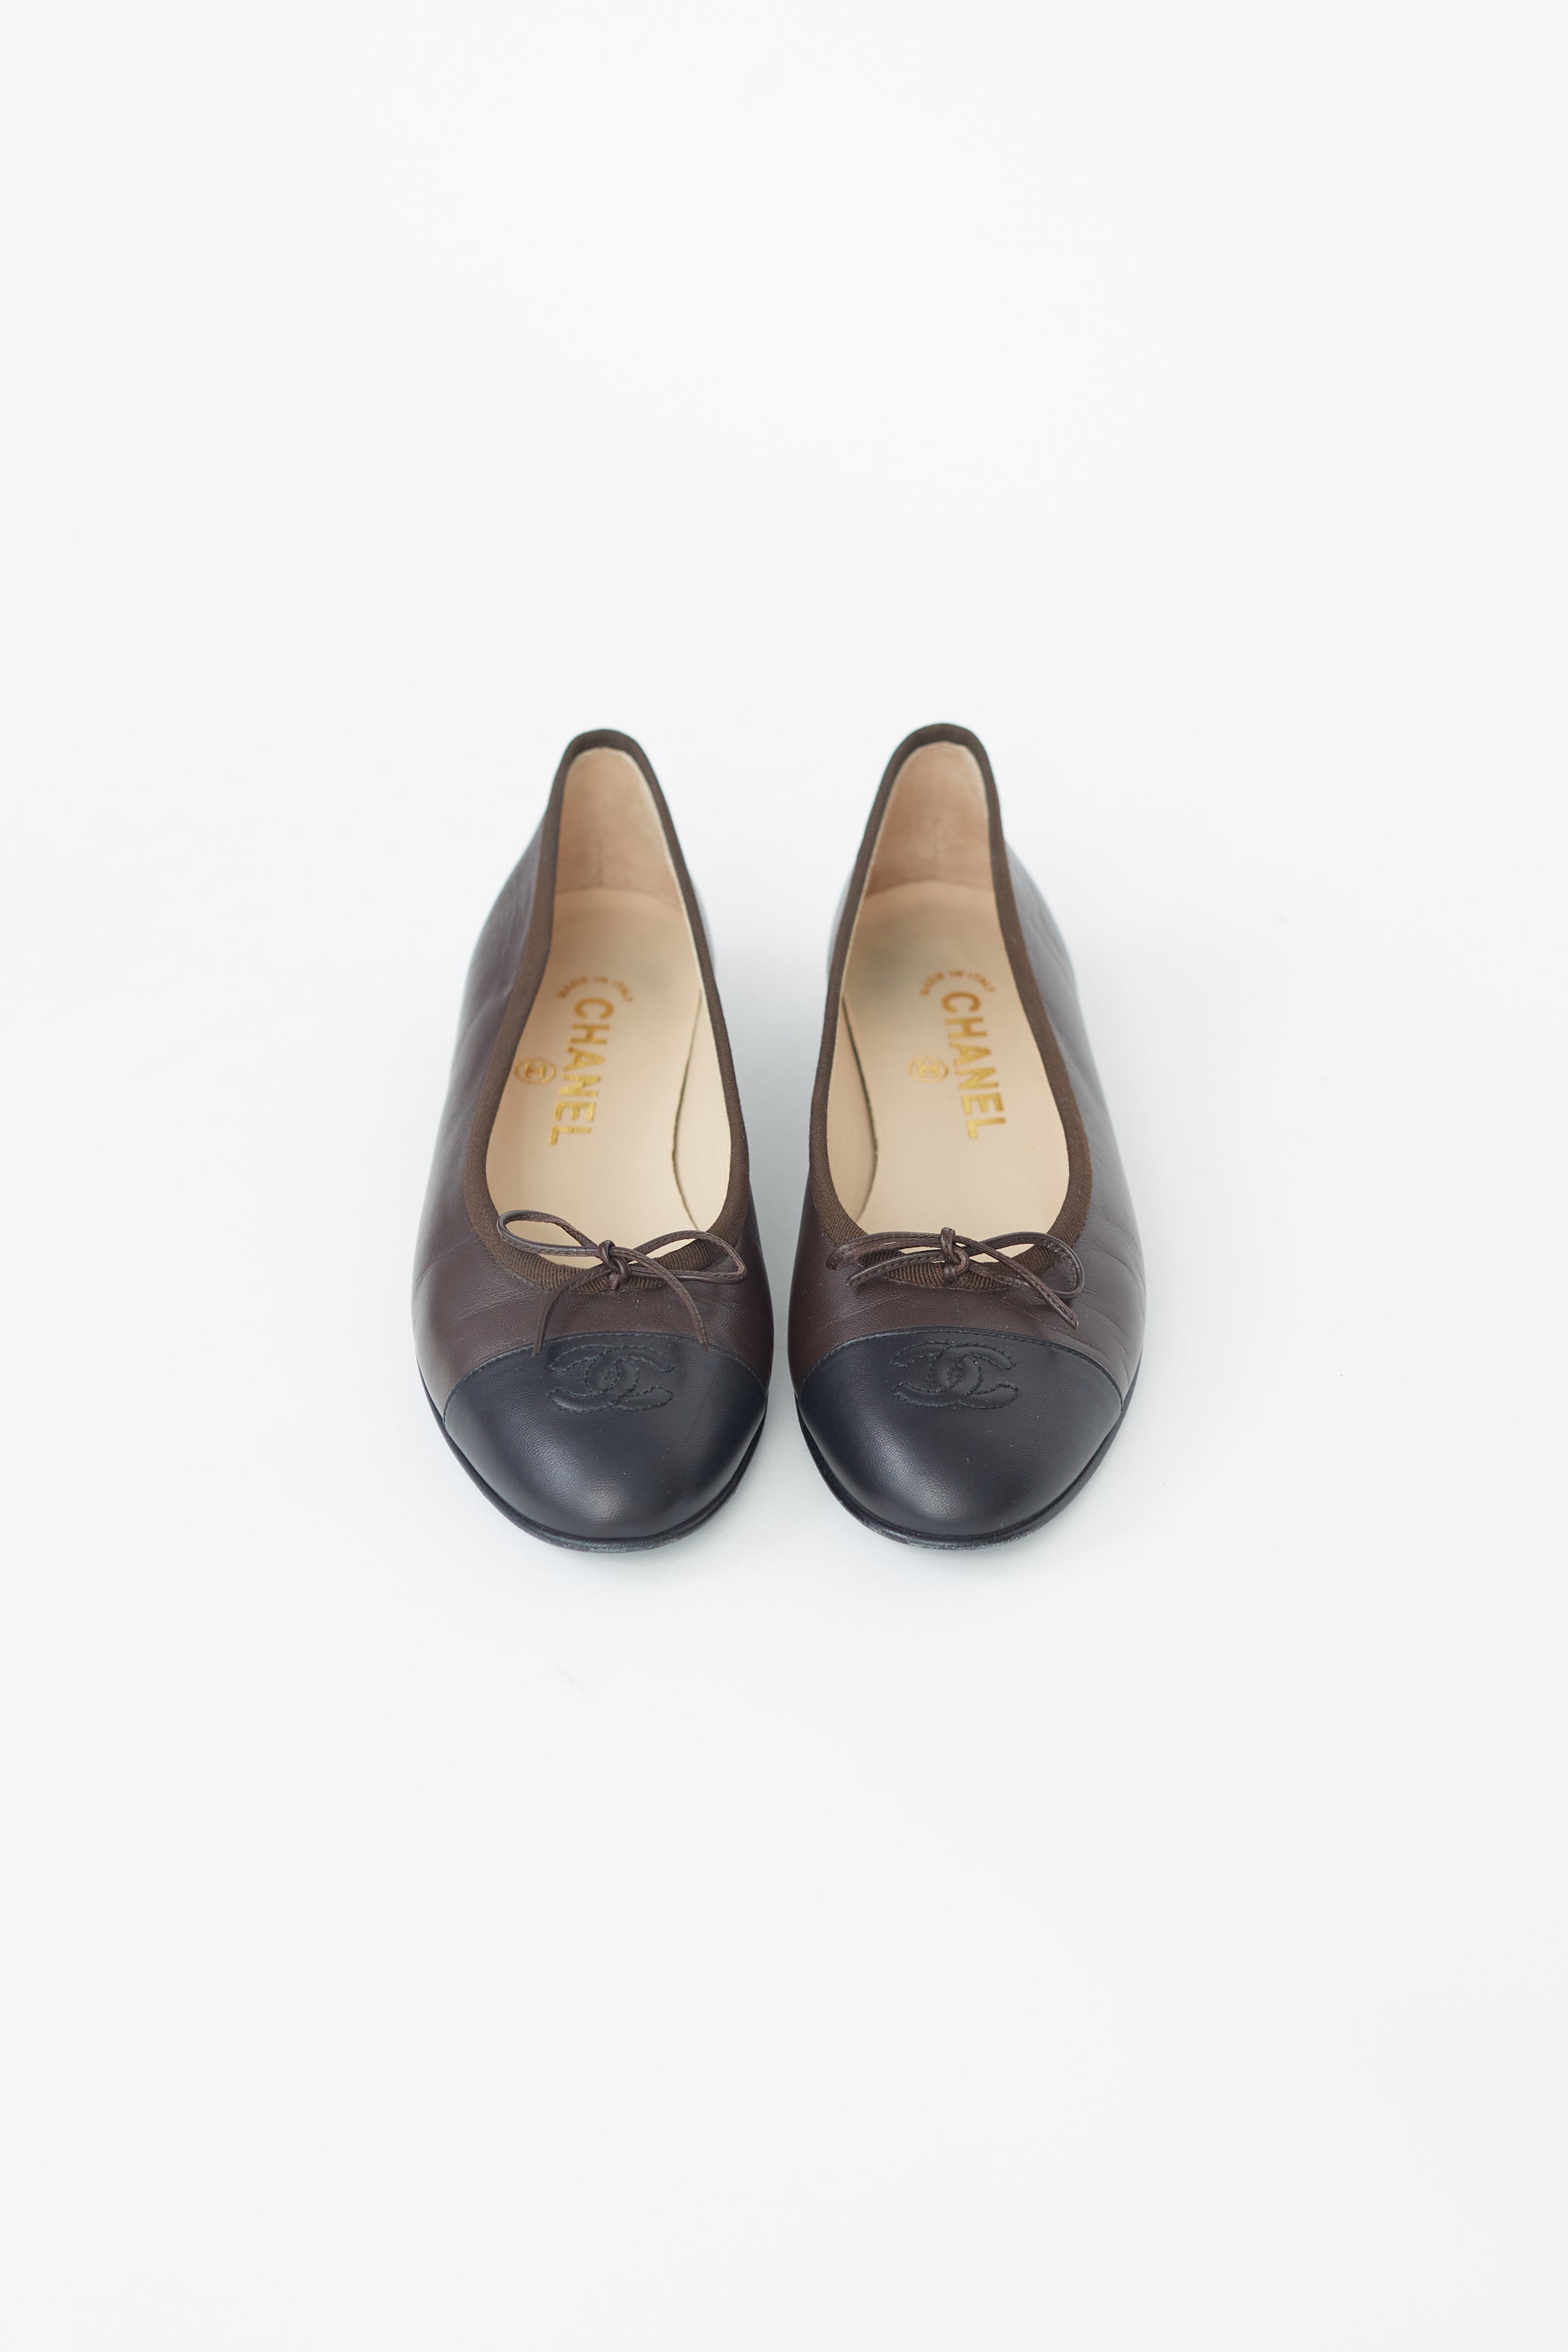 Chanel // Brown Leather Toe Cap Ballet Flat – VSP Consignment